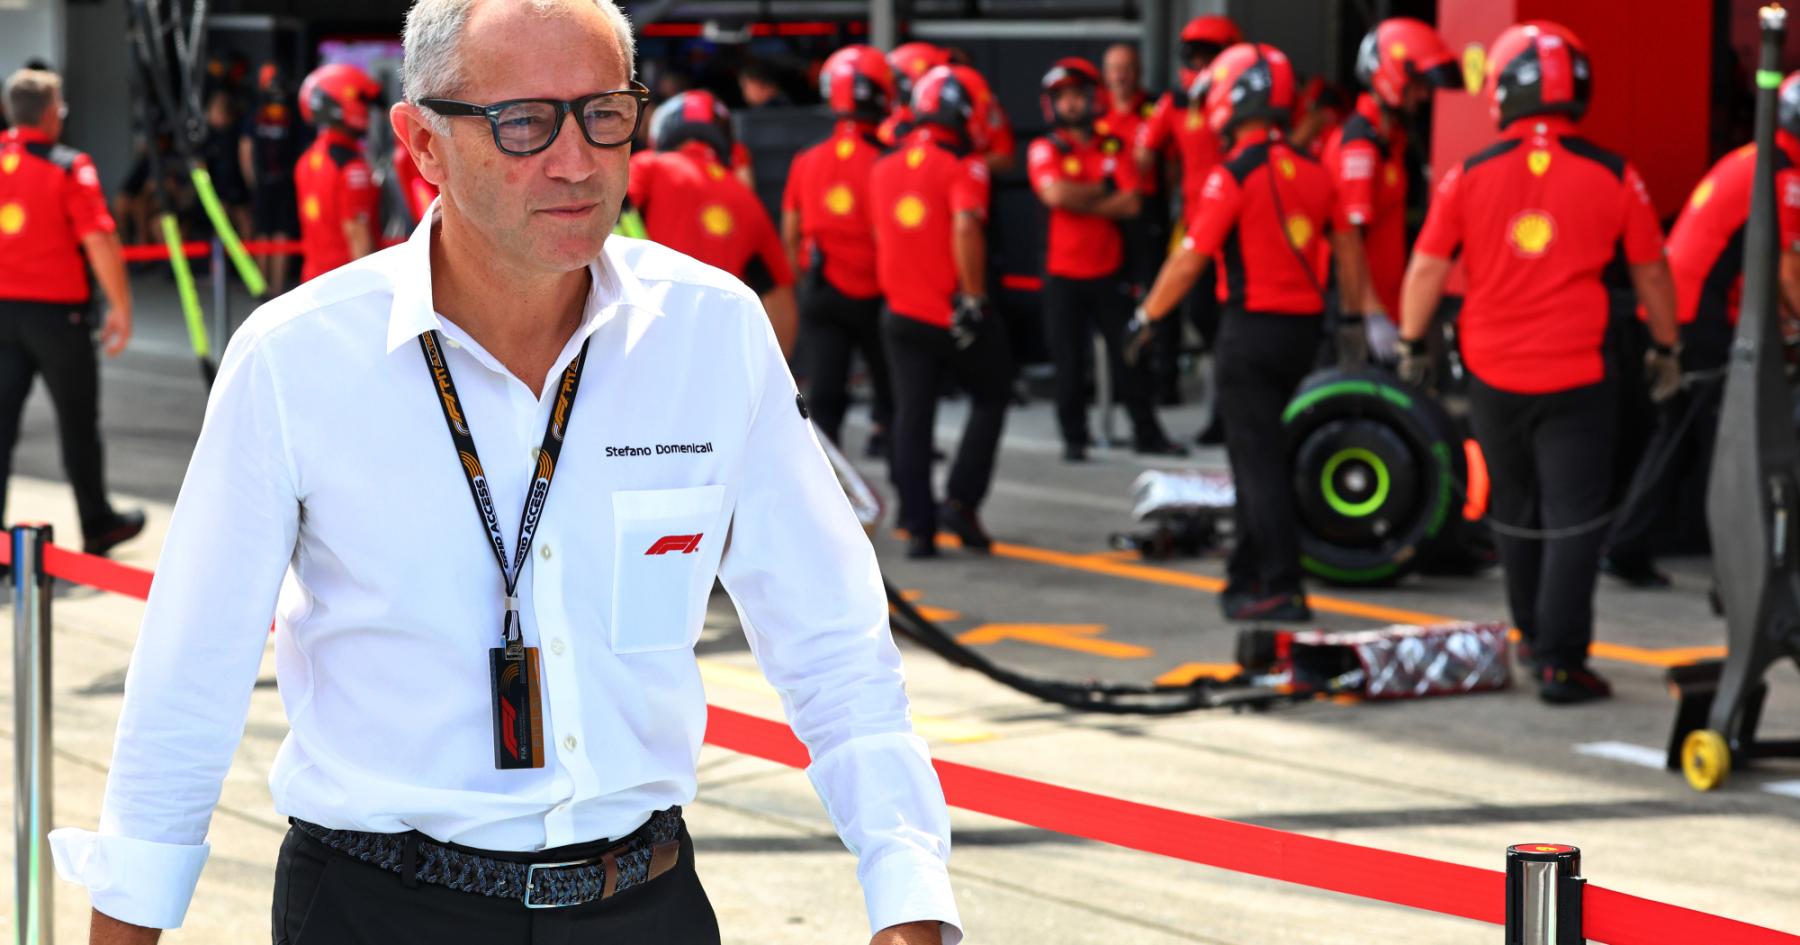 F1 Revolution on the Horizon: Domenicali Paves the Way for a Thrilling Future in 2030